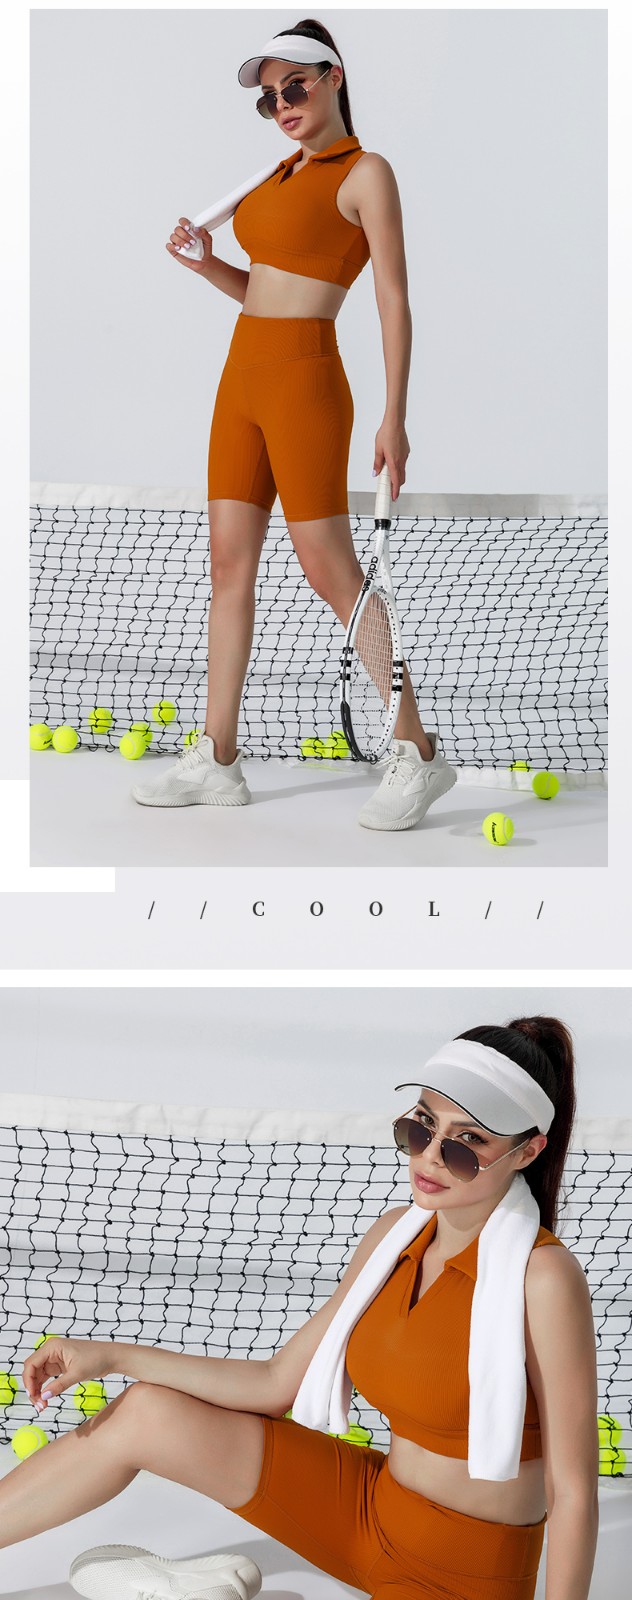 personalized women's tennis outfits owner for girls-4